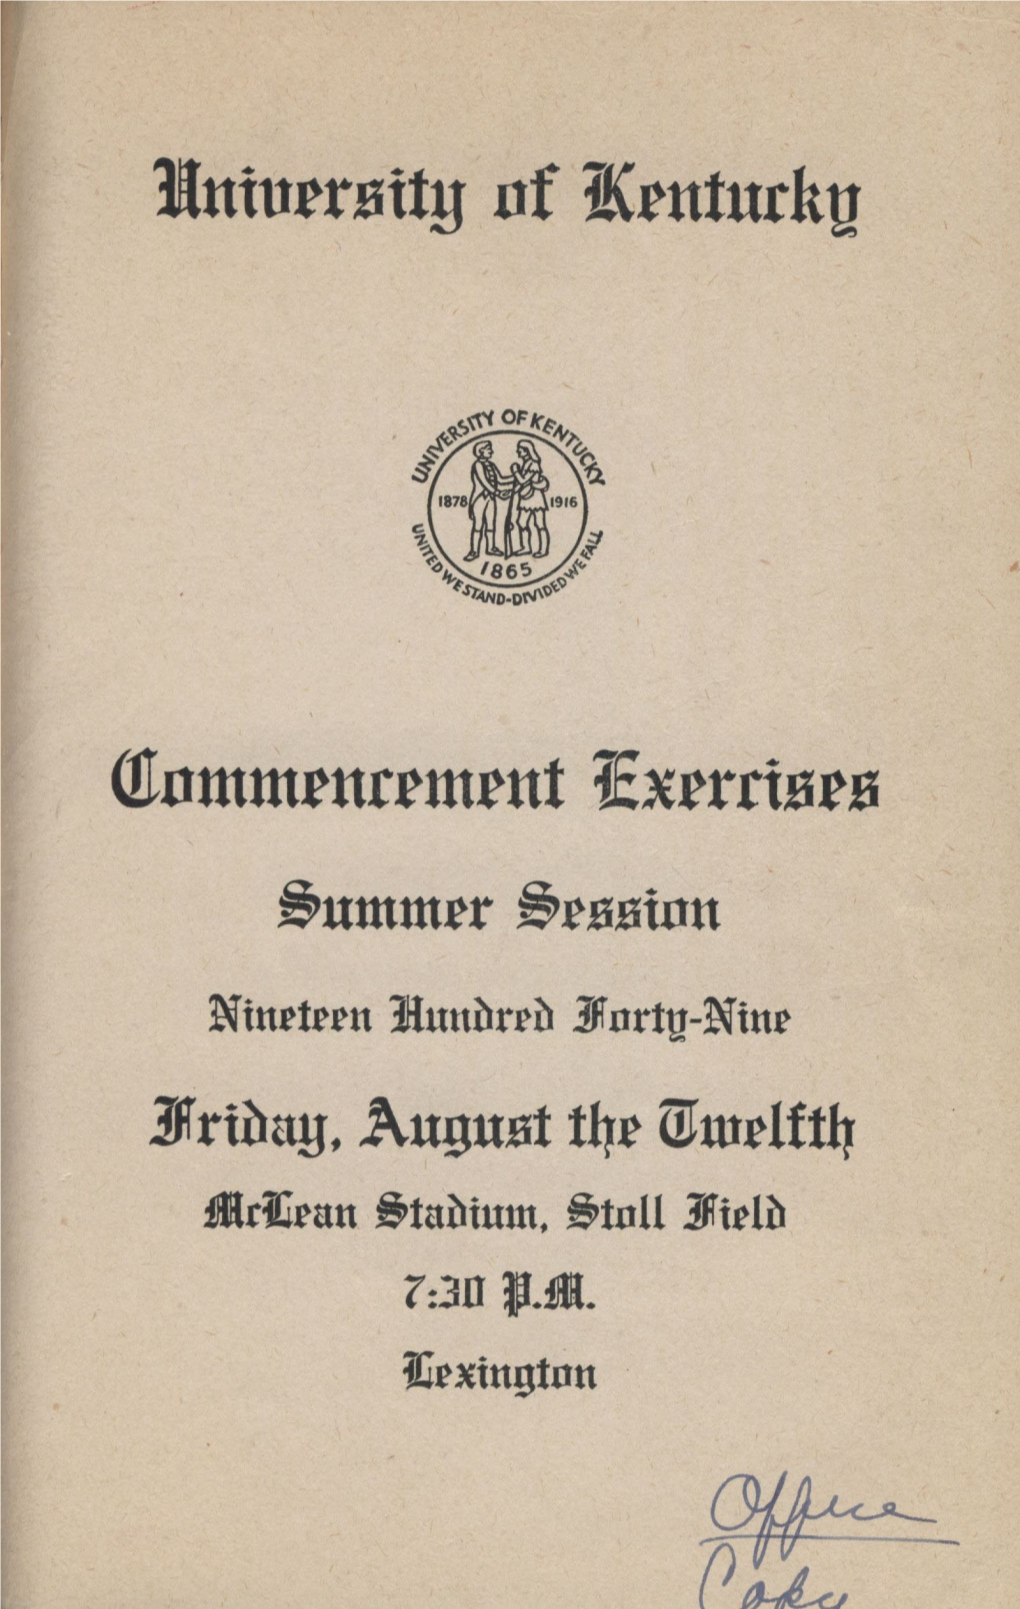 College of Law Commencement Program, 1949 Summer